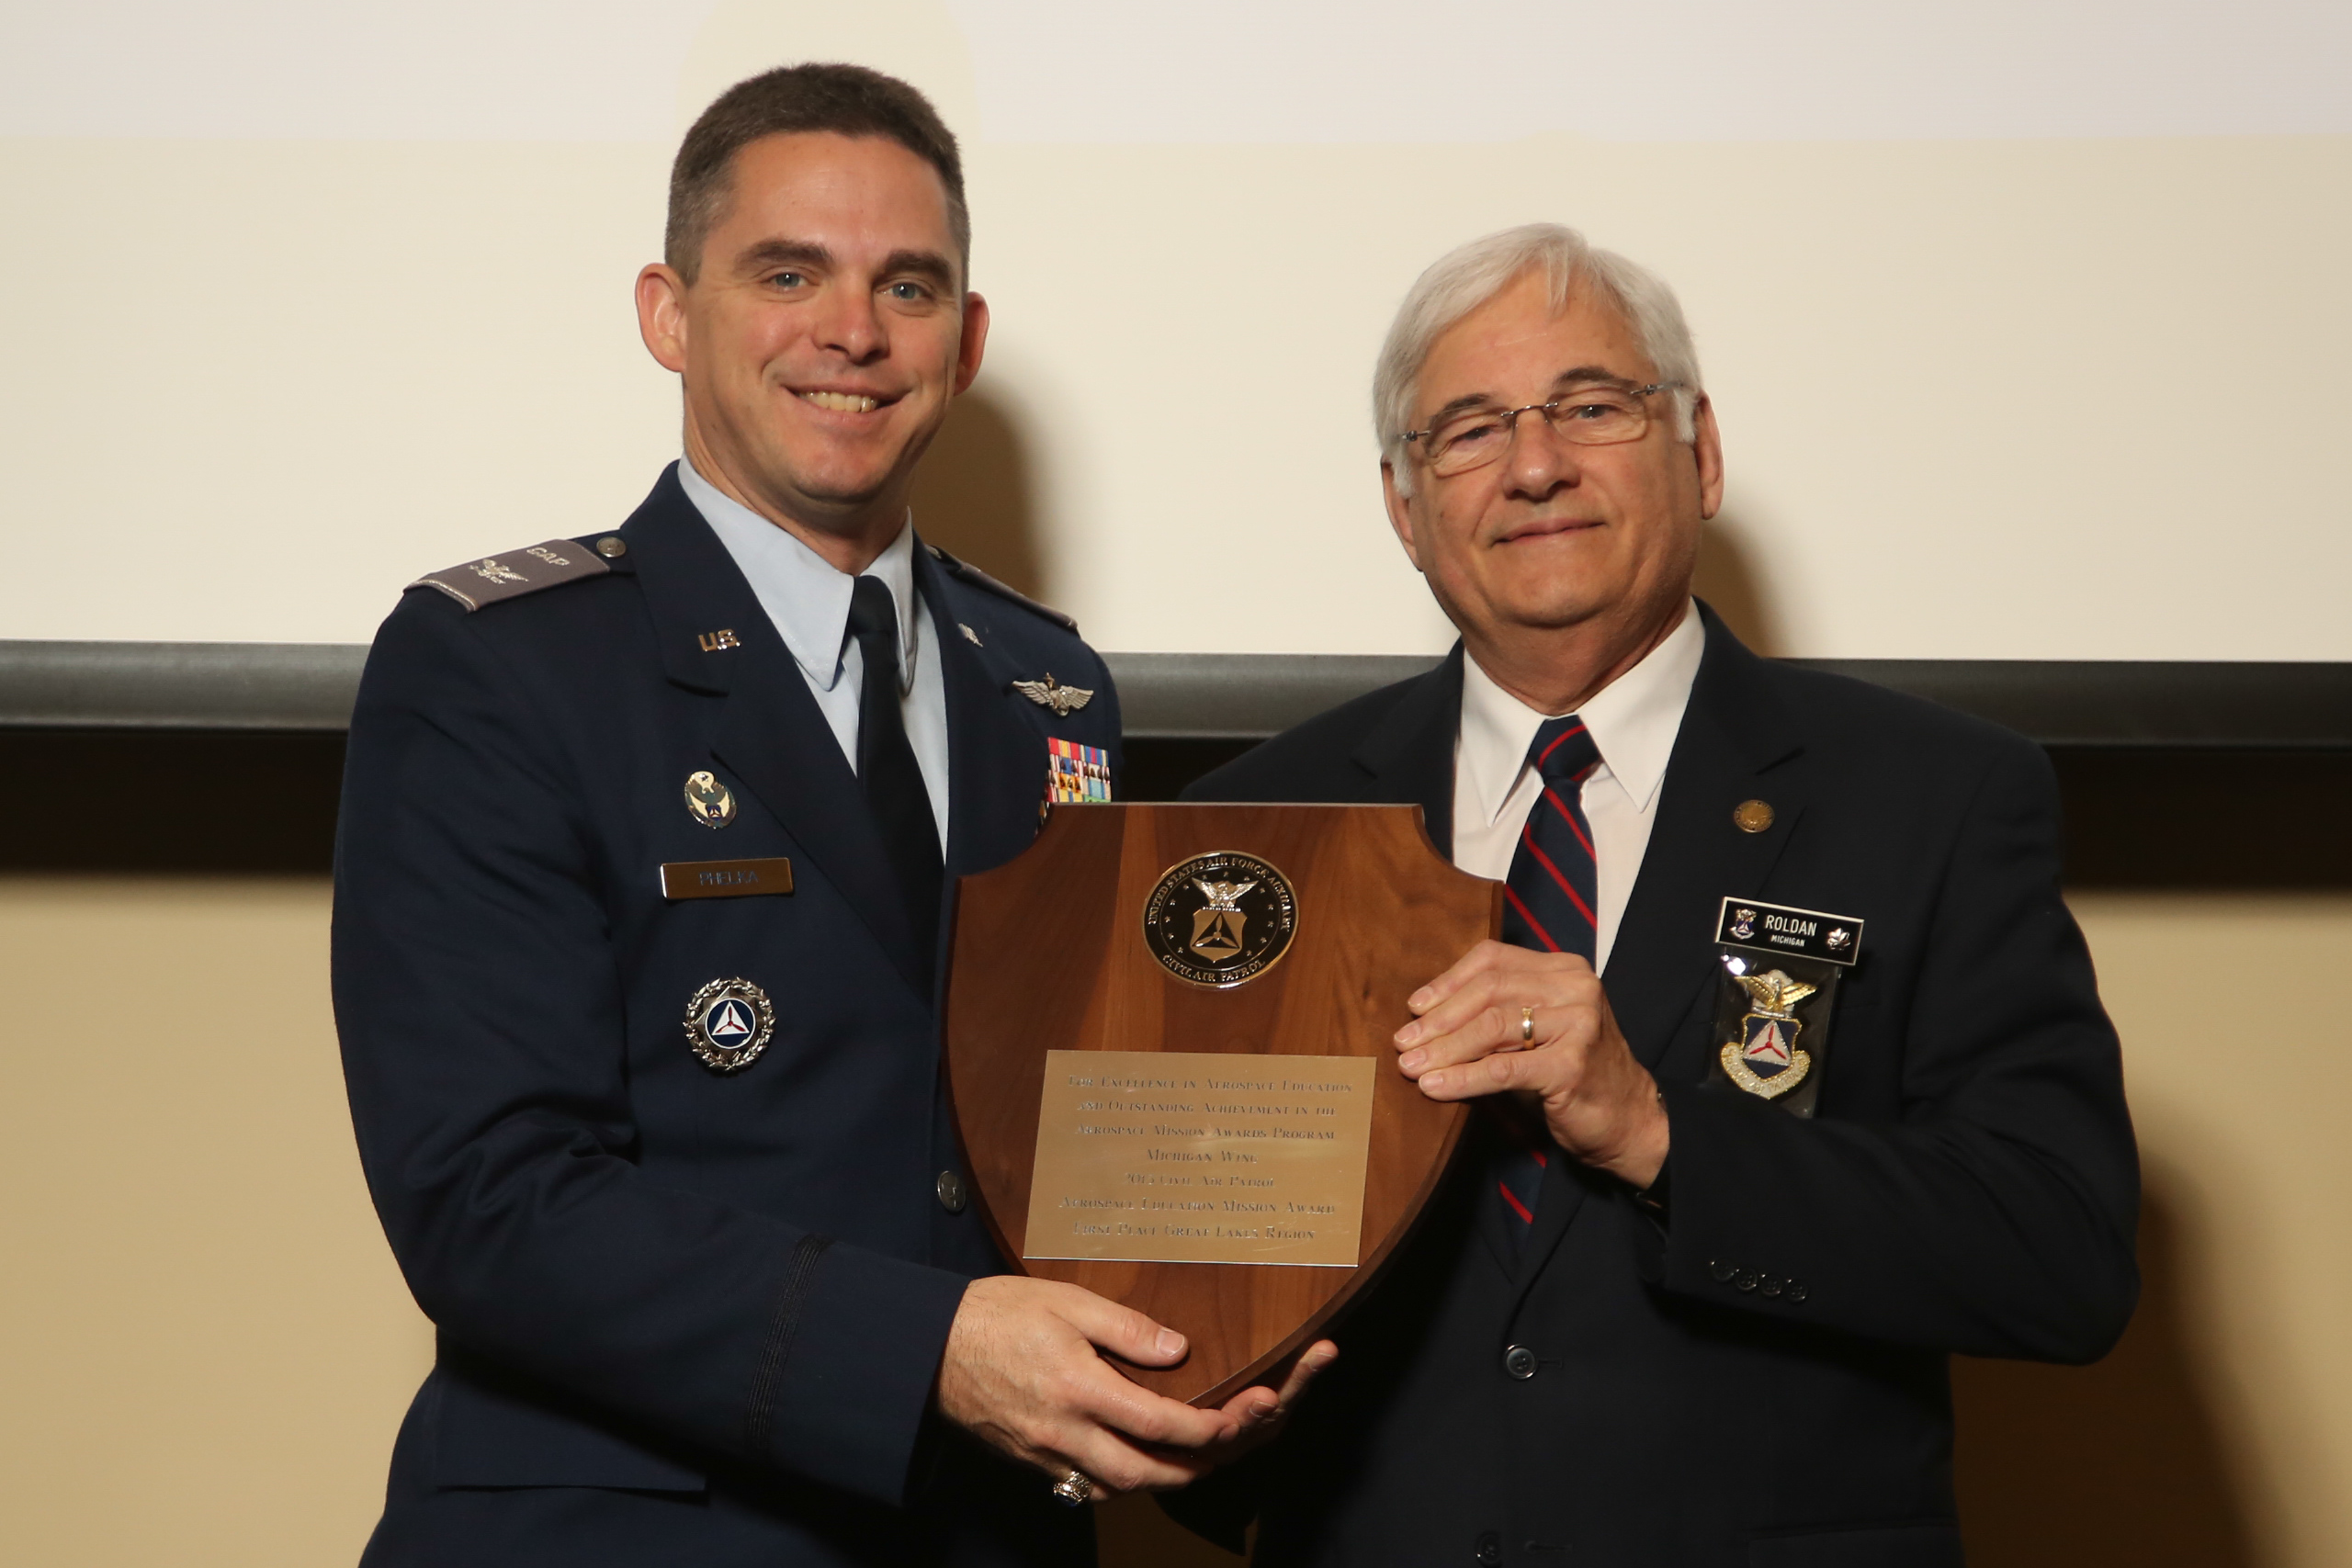 Lt. Col Frank Roldan accepts the Great Lakes AE mission award in 2017.